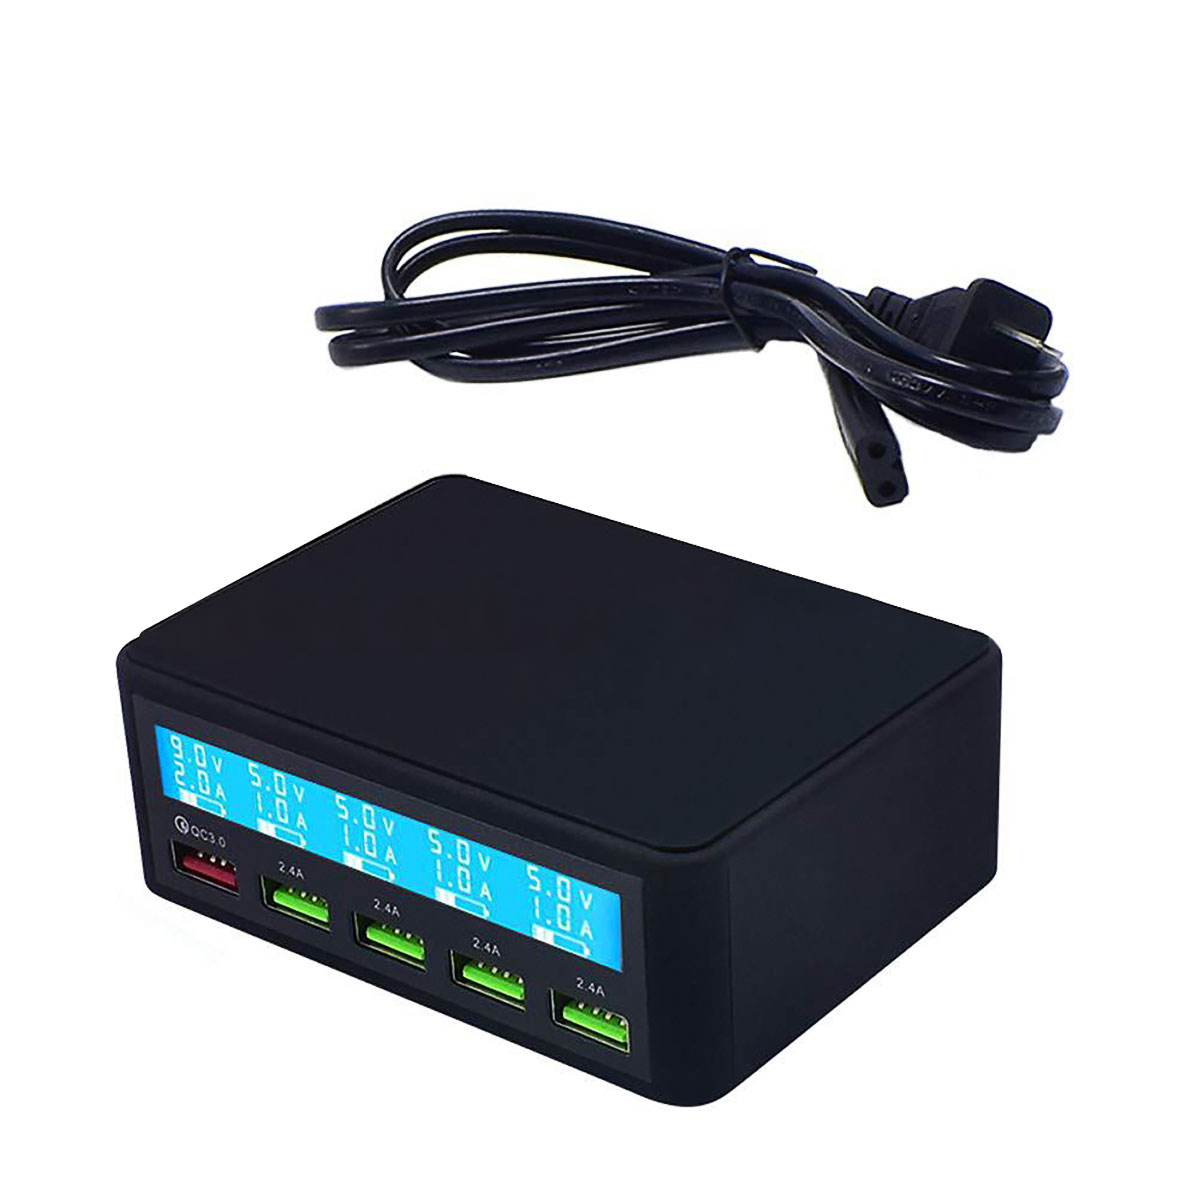 

5V/10A LCD Display USB Charger Adapter Quick Charge 3.0 Multi Port Mobile Phone Rapid Charger USB Socket